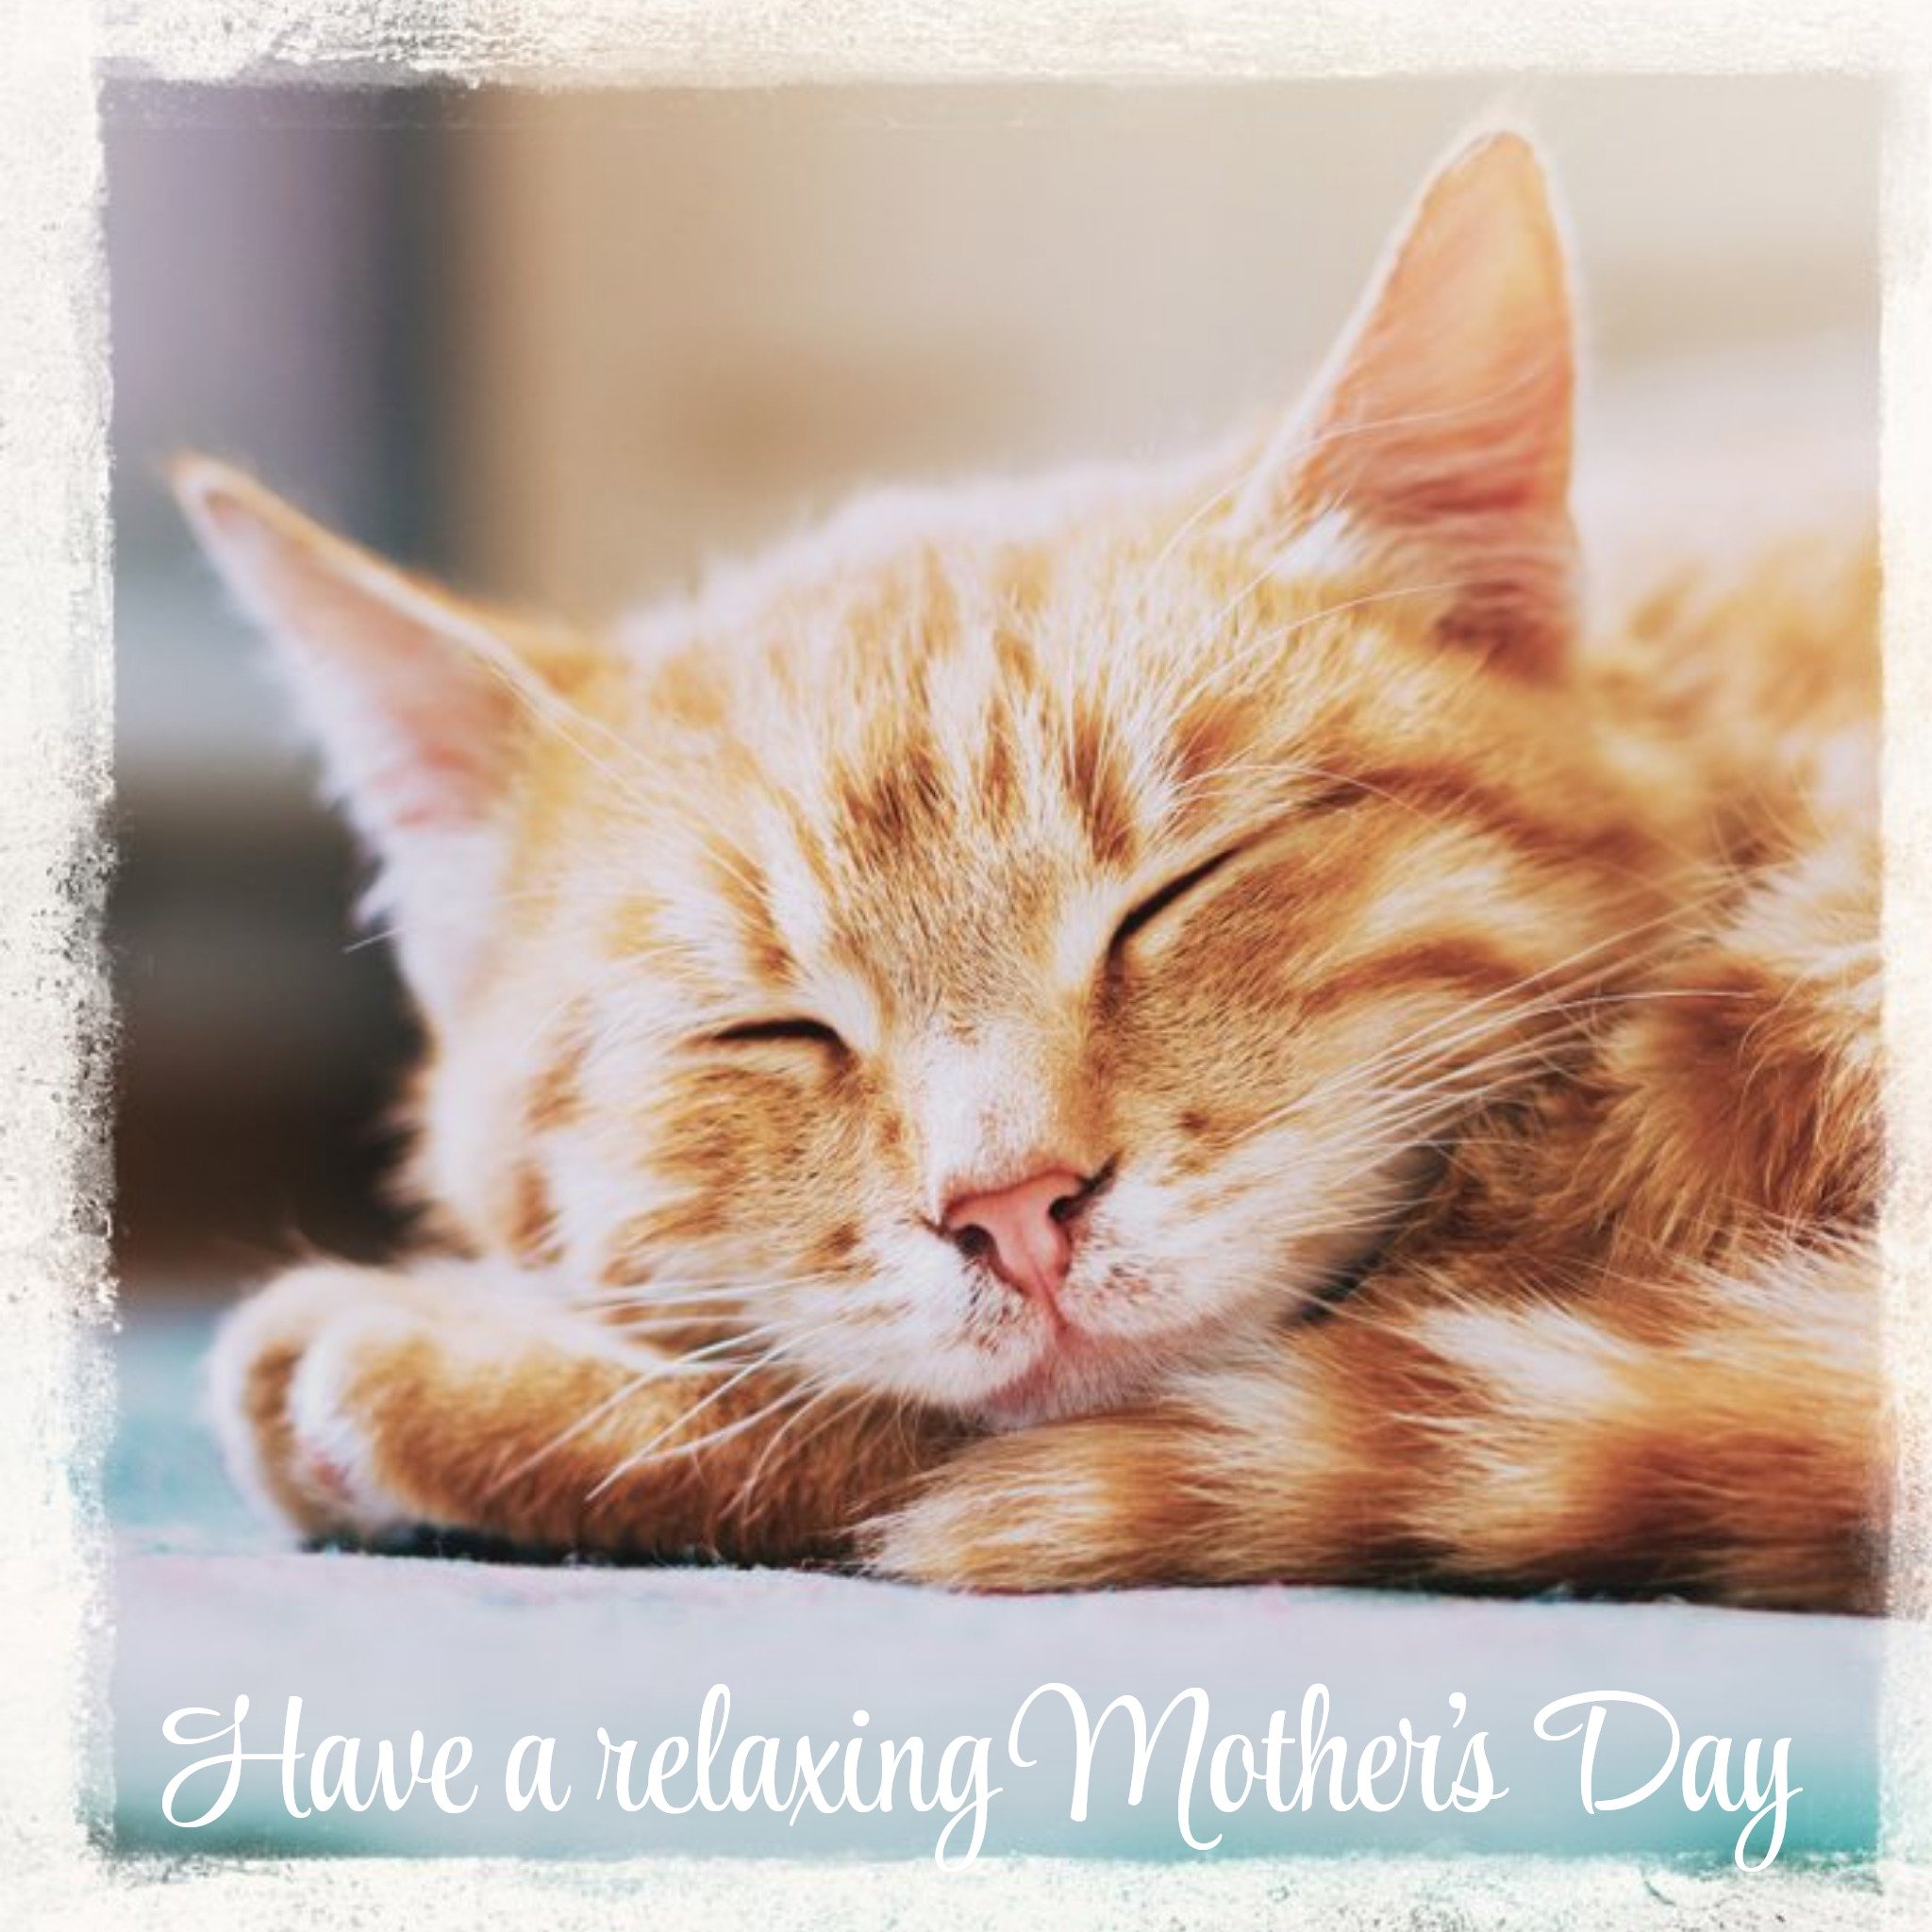 Moonpig Sleeping Cat Have A Relaxing Mother's Day Card, Square